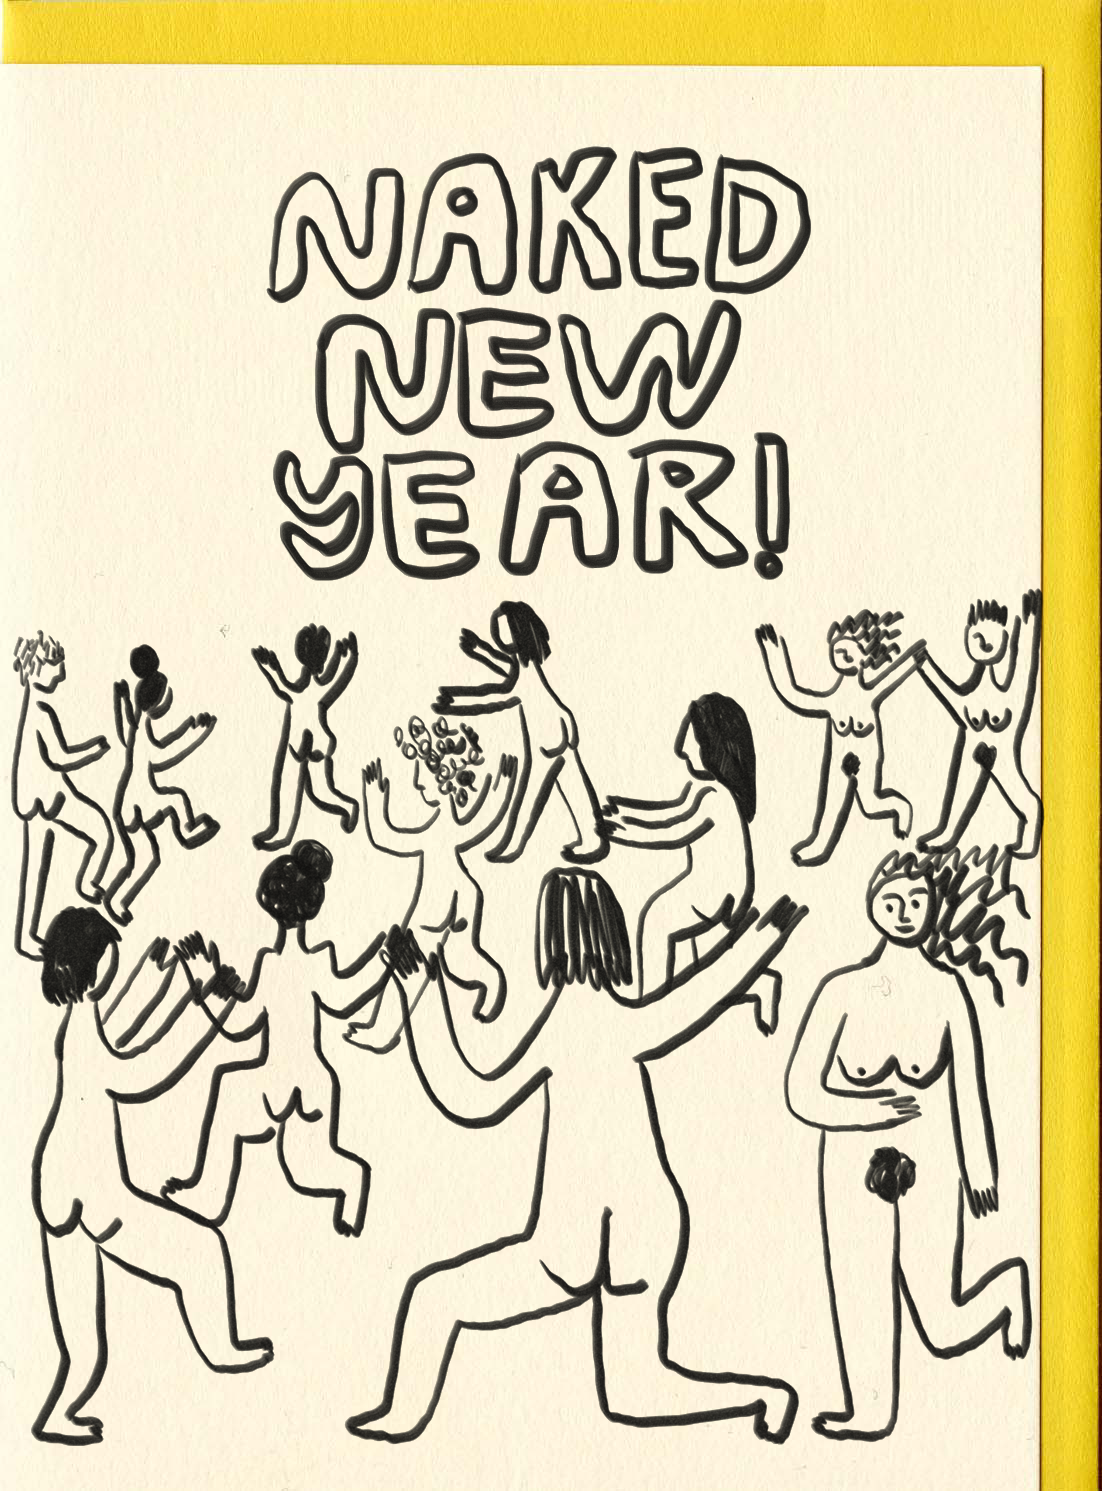 Naked New Year